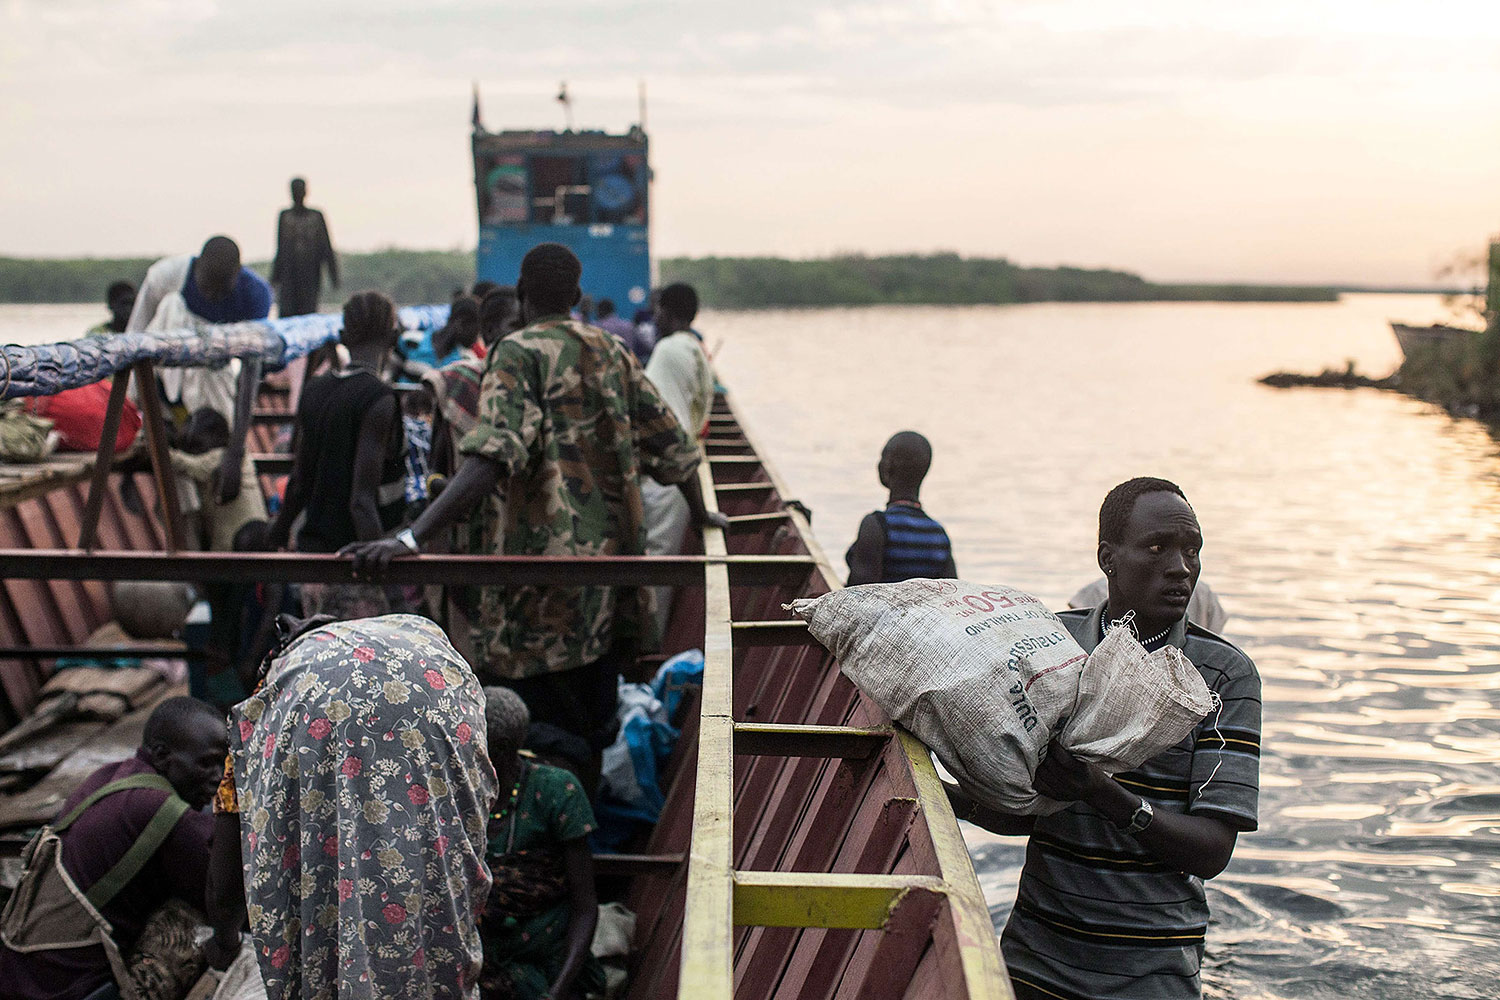 People unload the few belongings on Jan. 9, 2014 at Minkammen, South Sudan that they were able to bring with them to the camps.